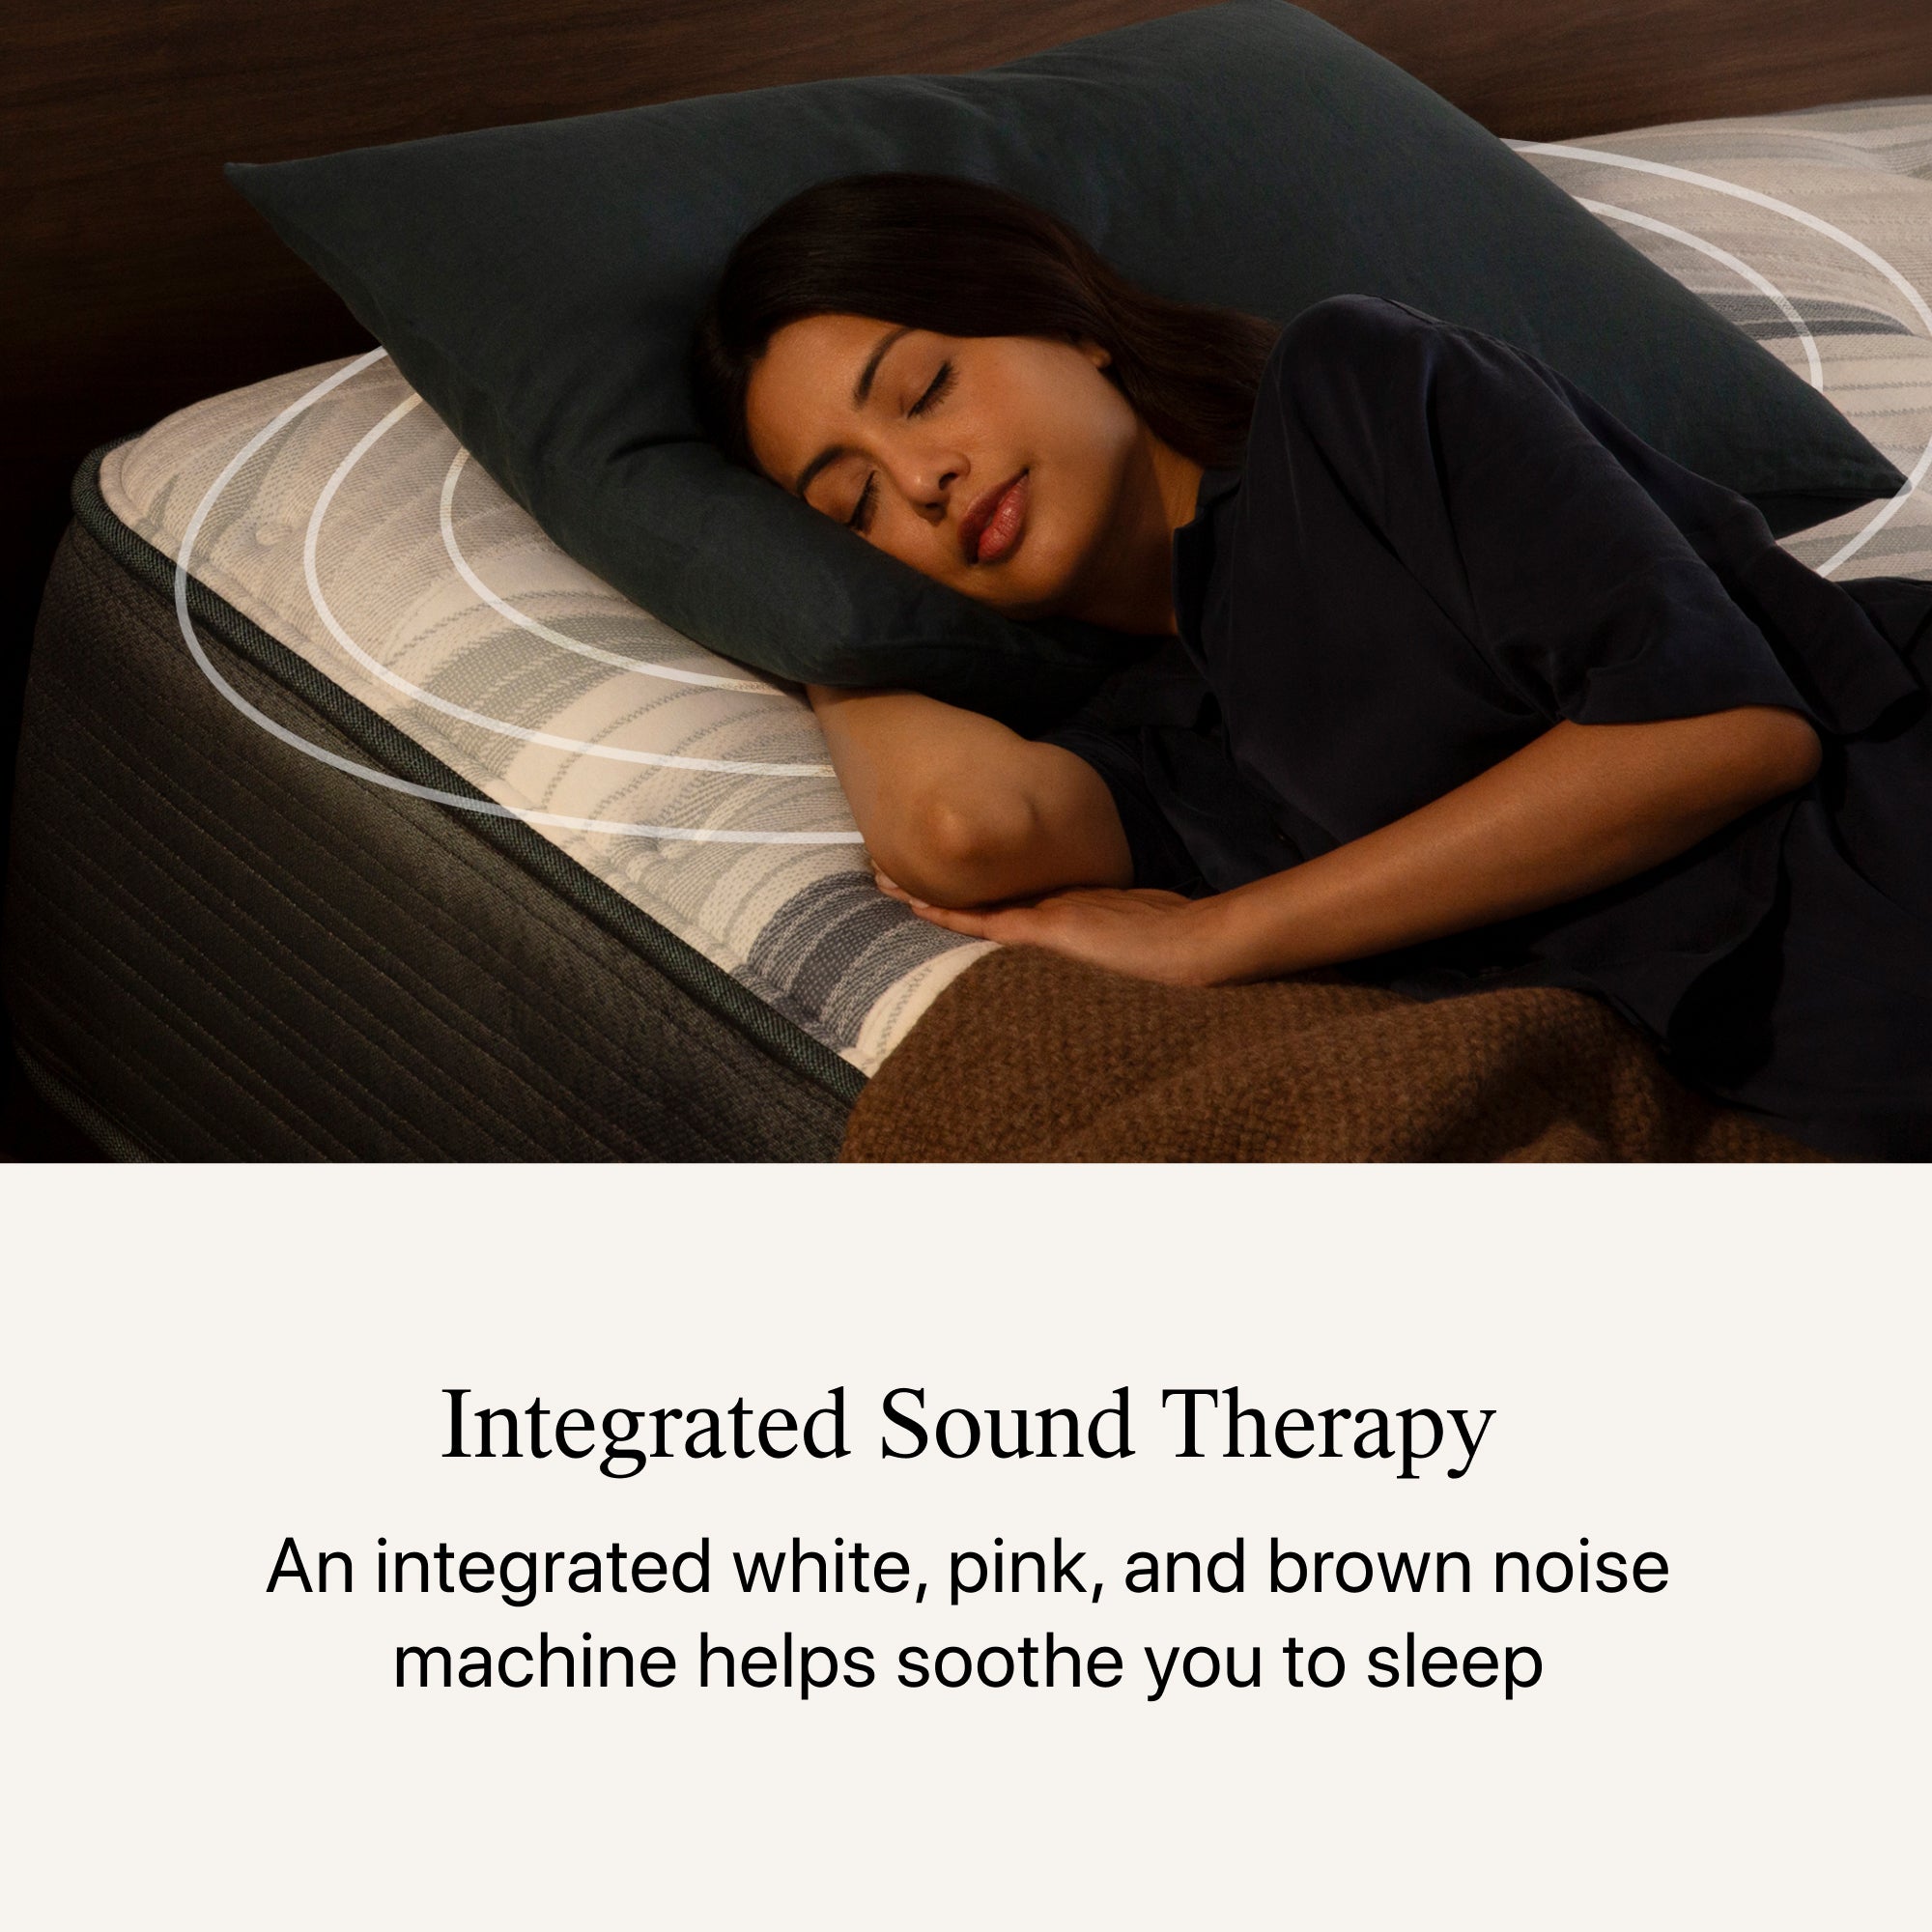 Woman laying on a mattress elevated at the top within a  Motion Restore Base. below the image, the headline states Integrated Sound Therapy  An integrated white, pink, and brown noise machine helps soothe you to sleep